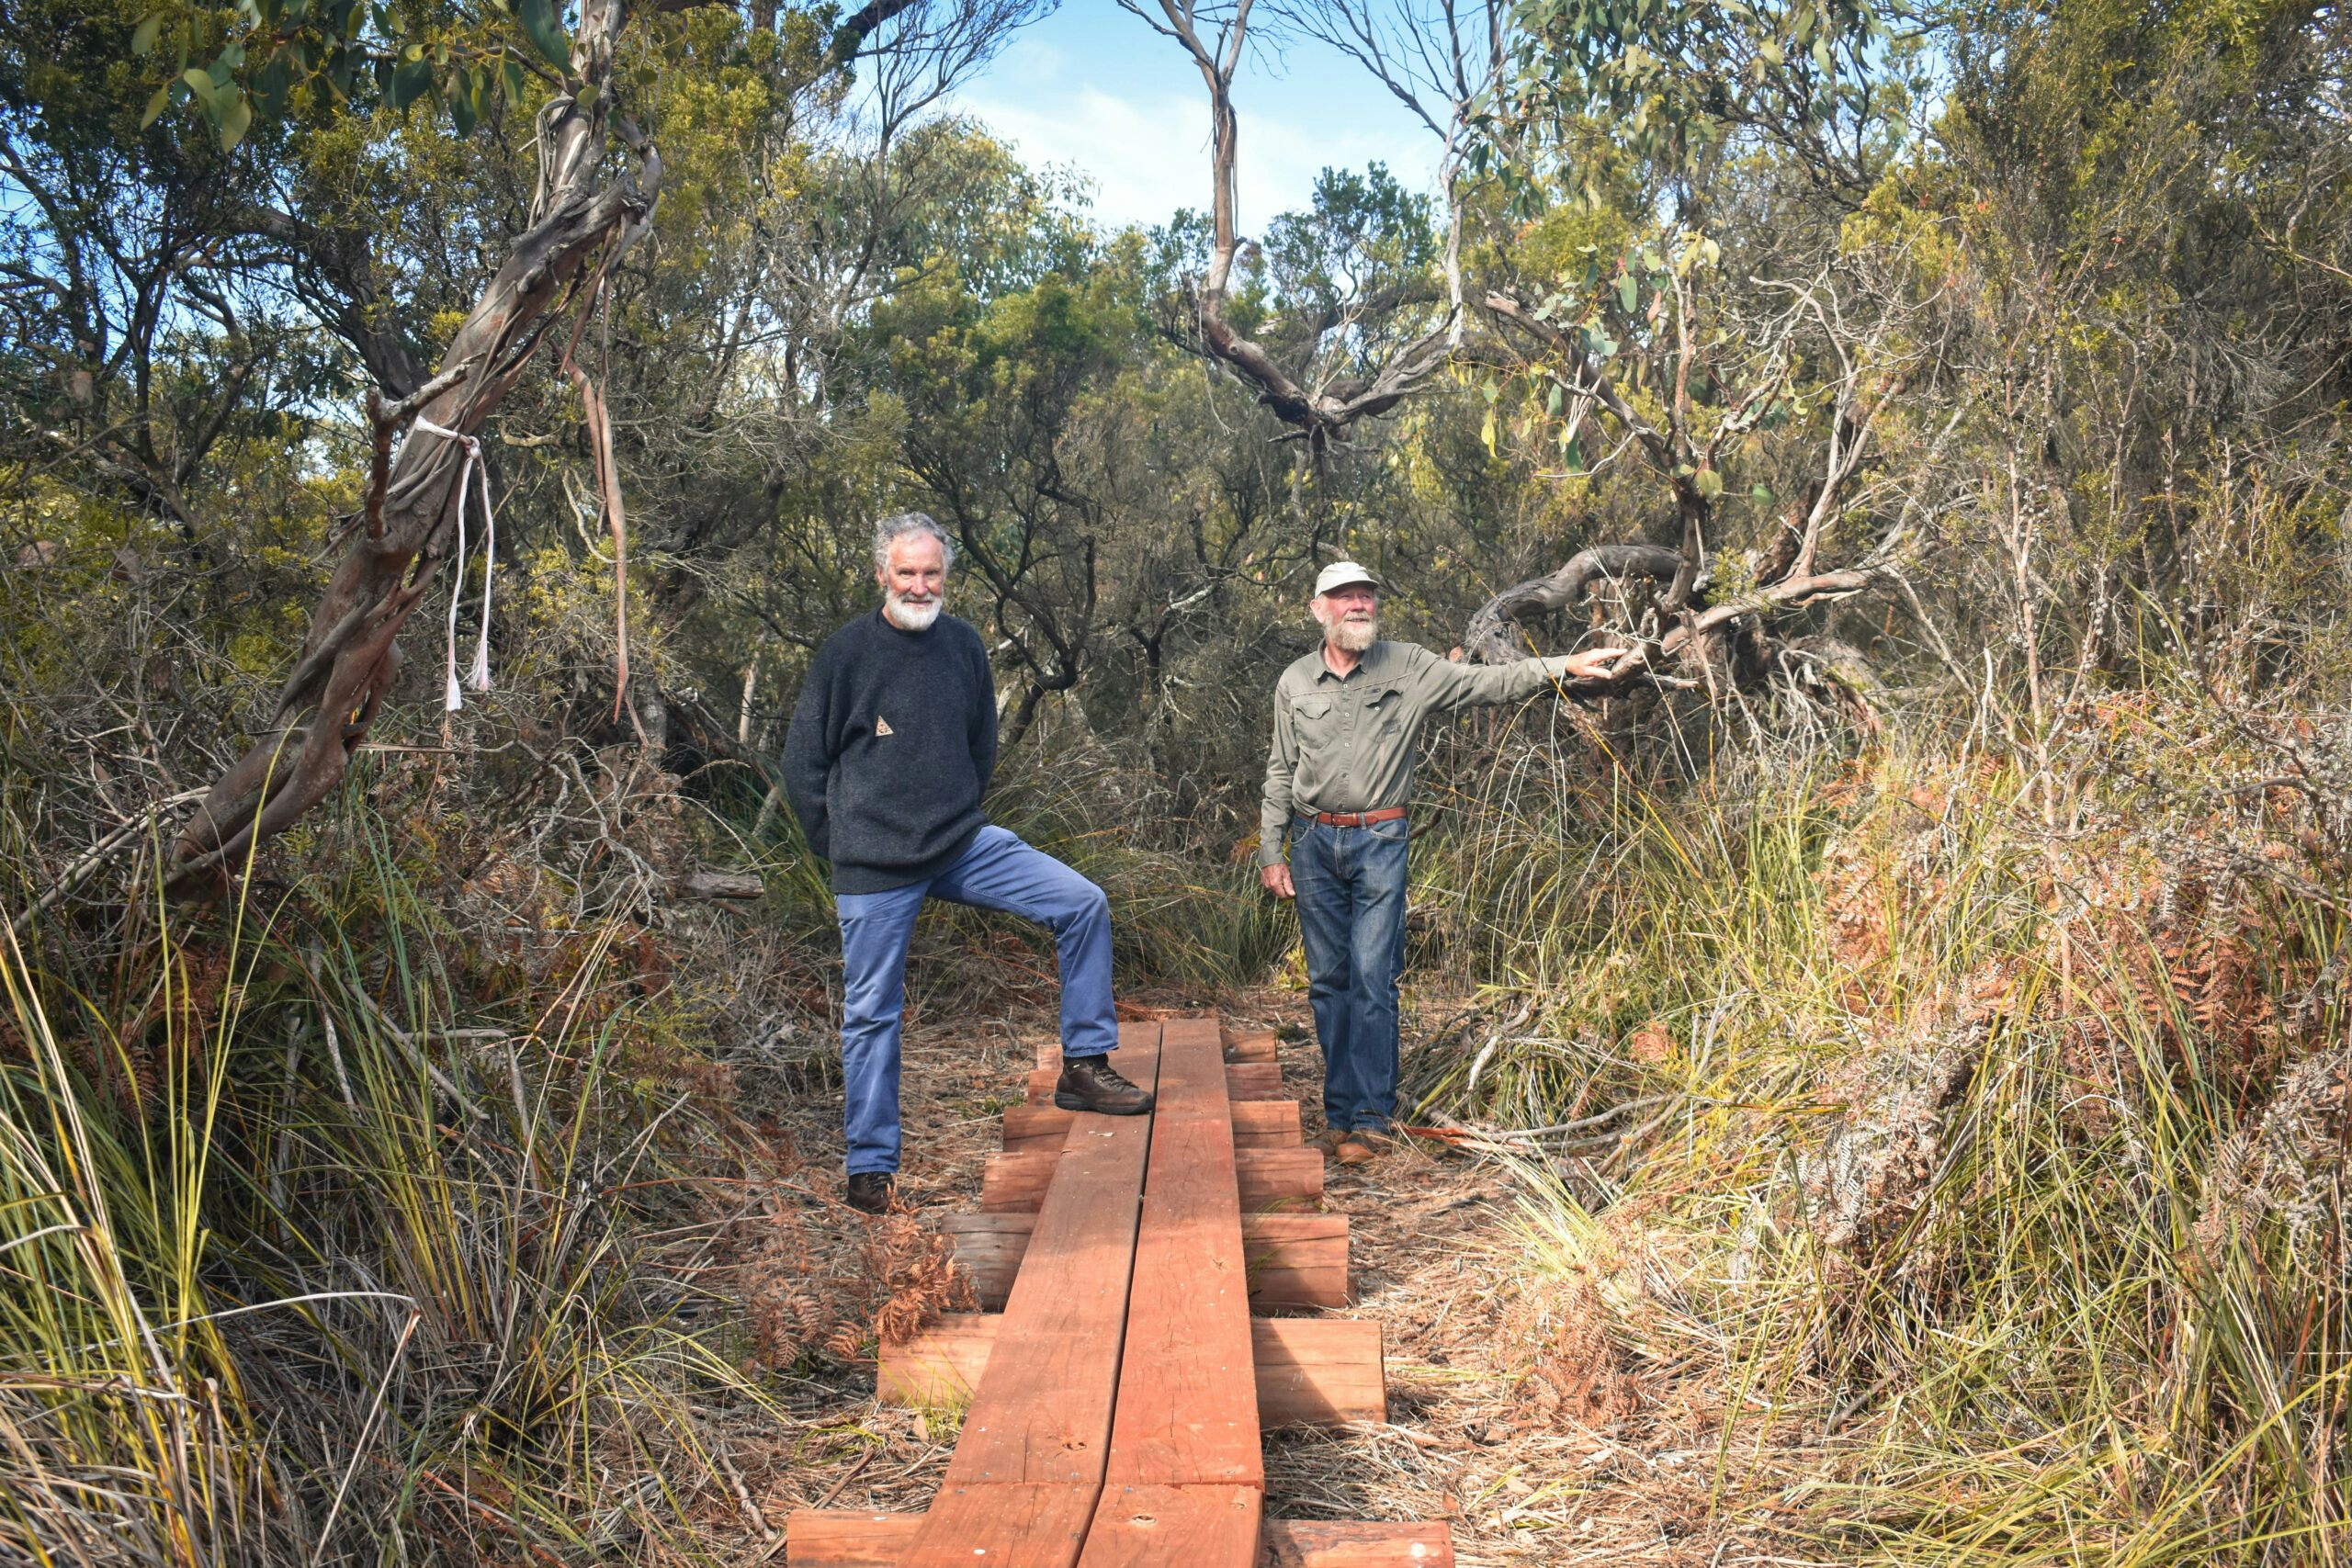 Thumbnail for New plank walk to bring nature a step closer to visitors